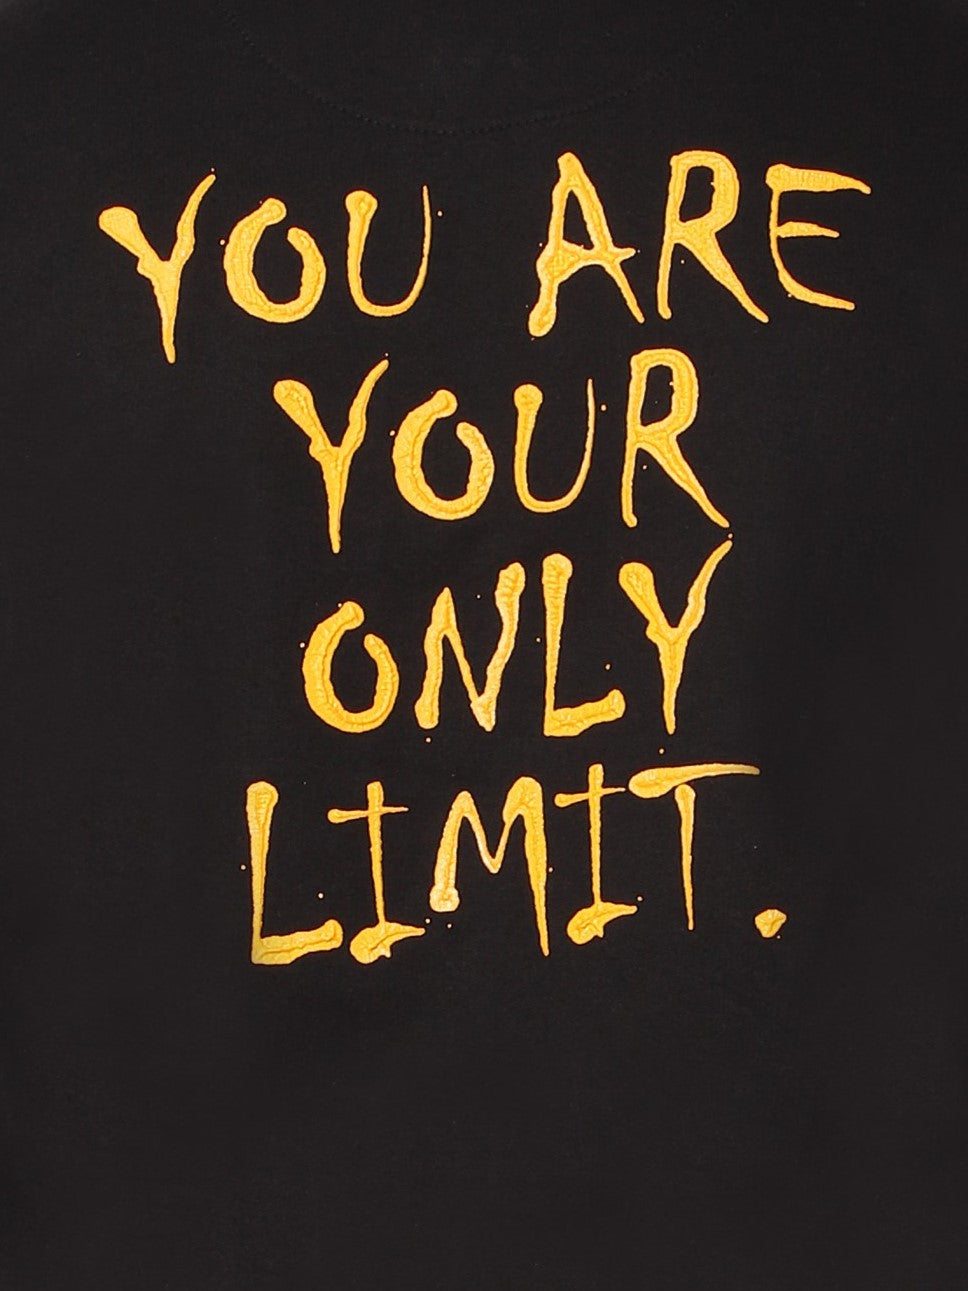 TeenTrums Unisex Sweatshirt - you are your only limit puff print - Black